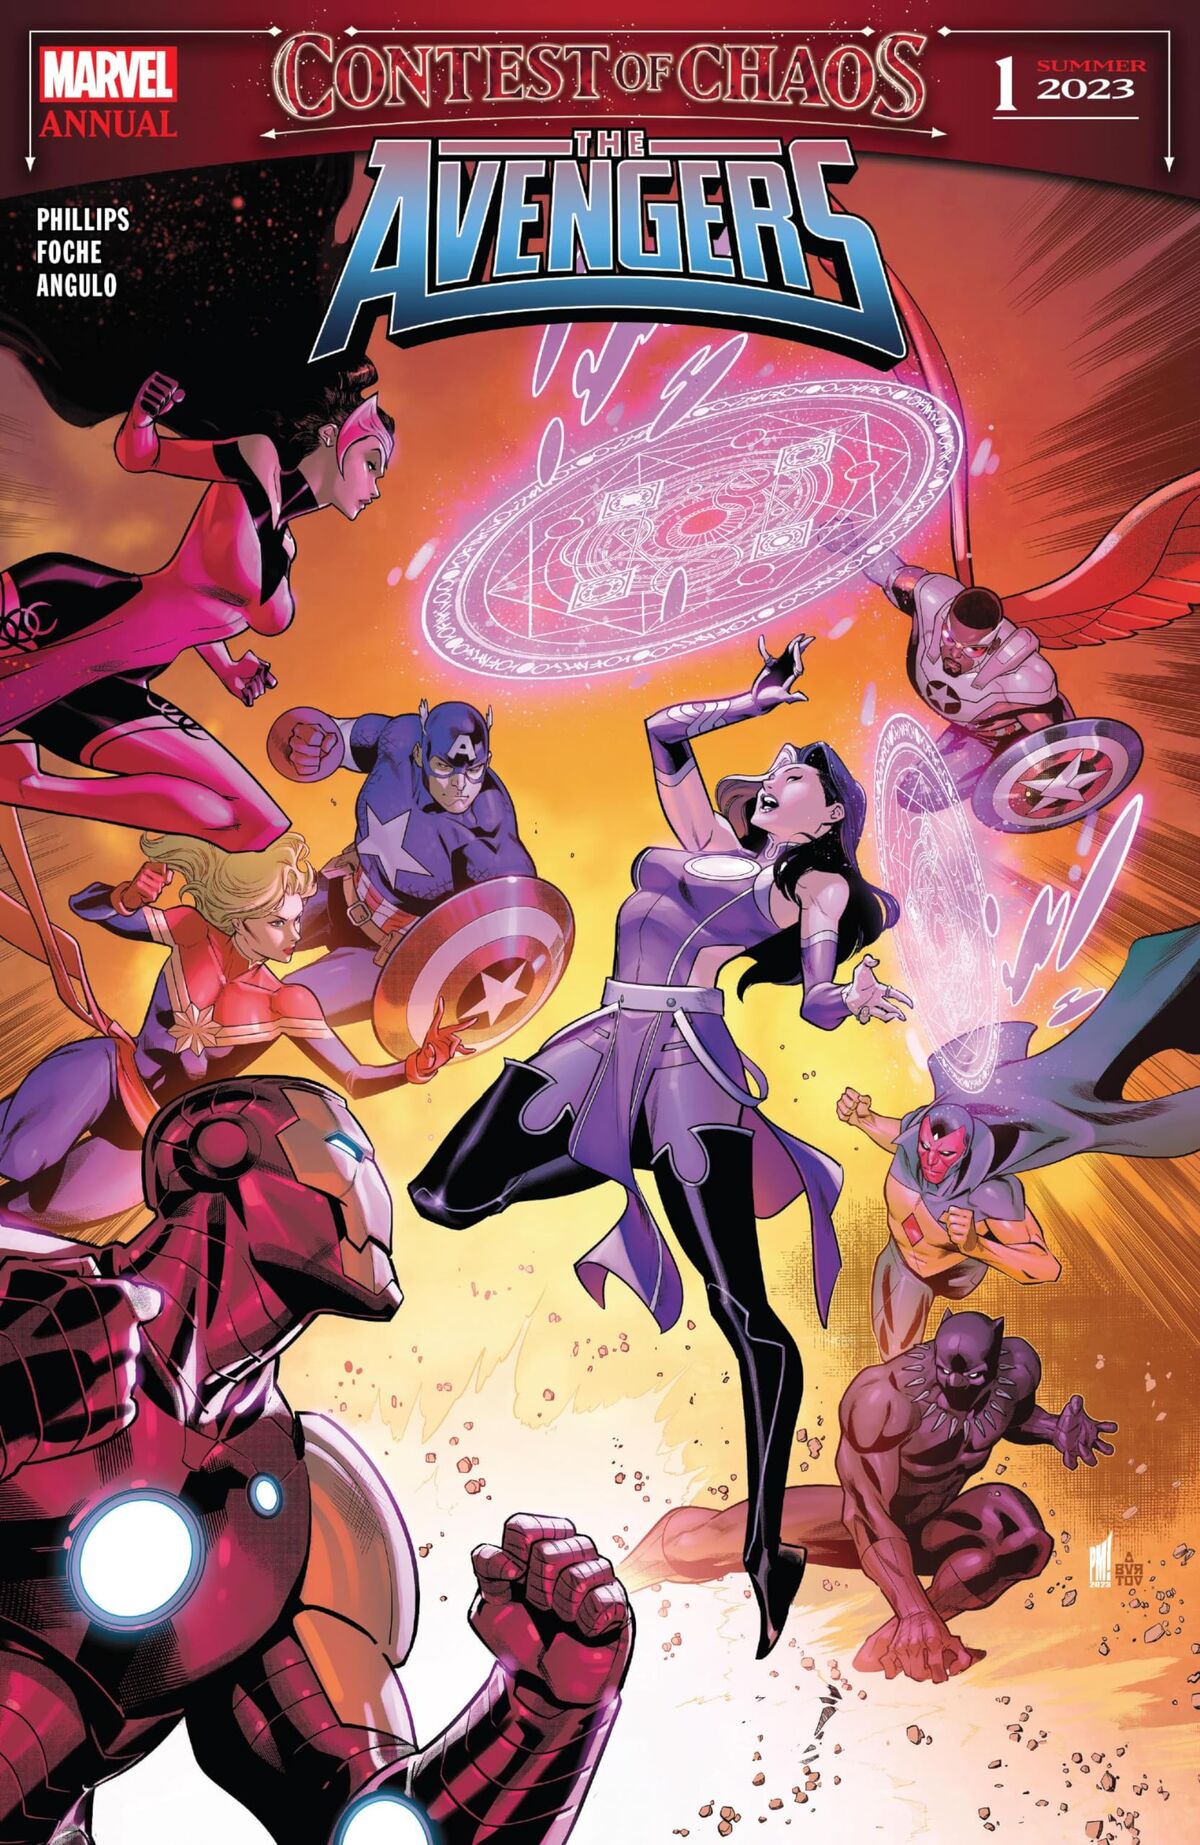 Avengers issue 5 (2023) - Read free comics online